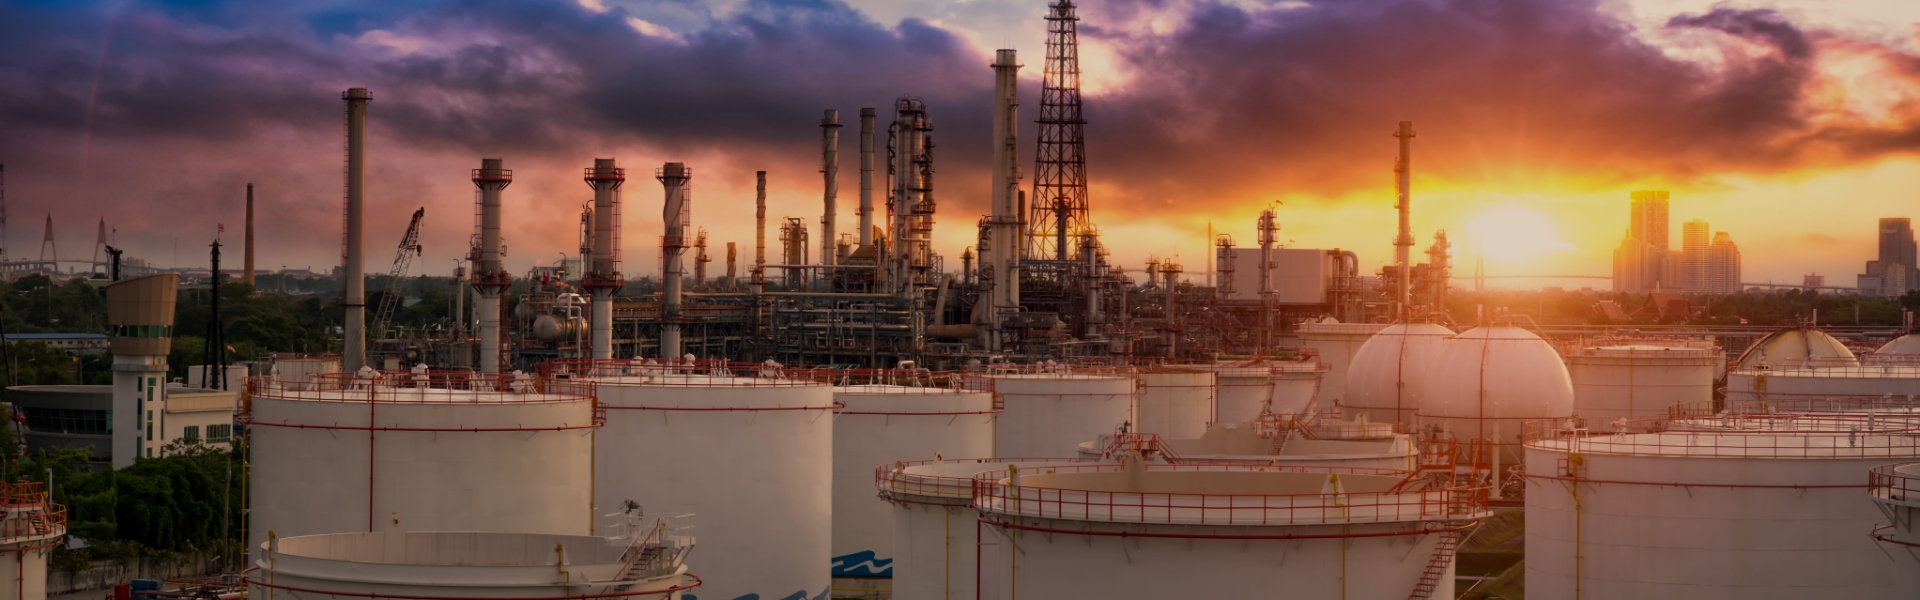 Genesis Endeavors is a leading oilfield services provider